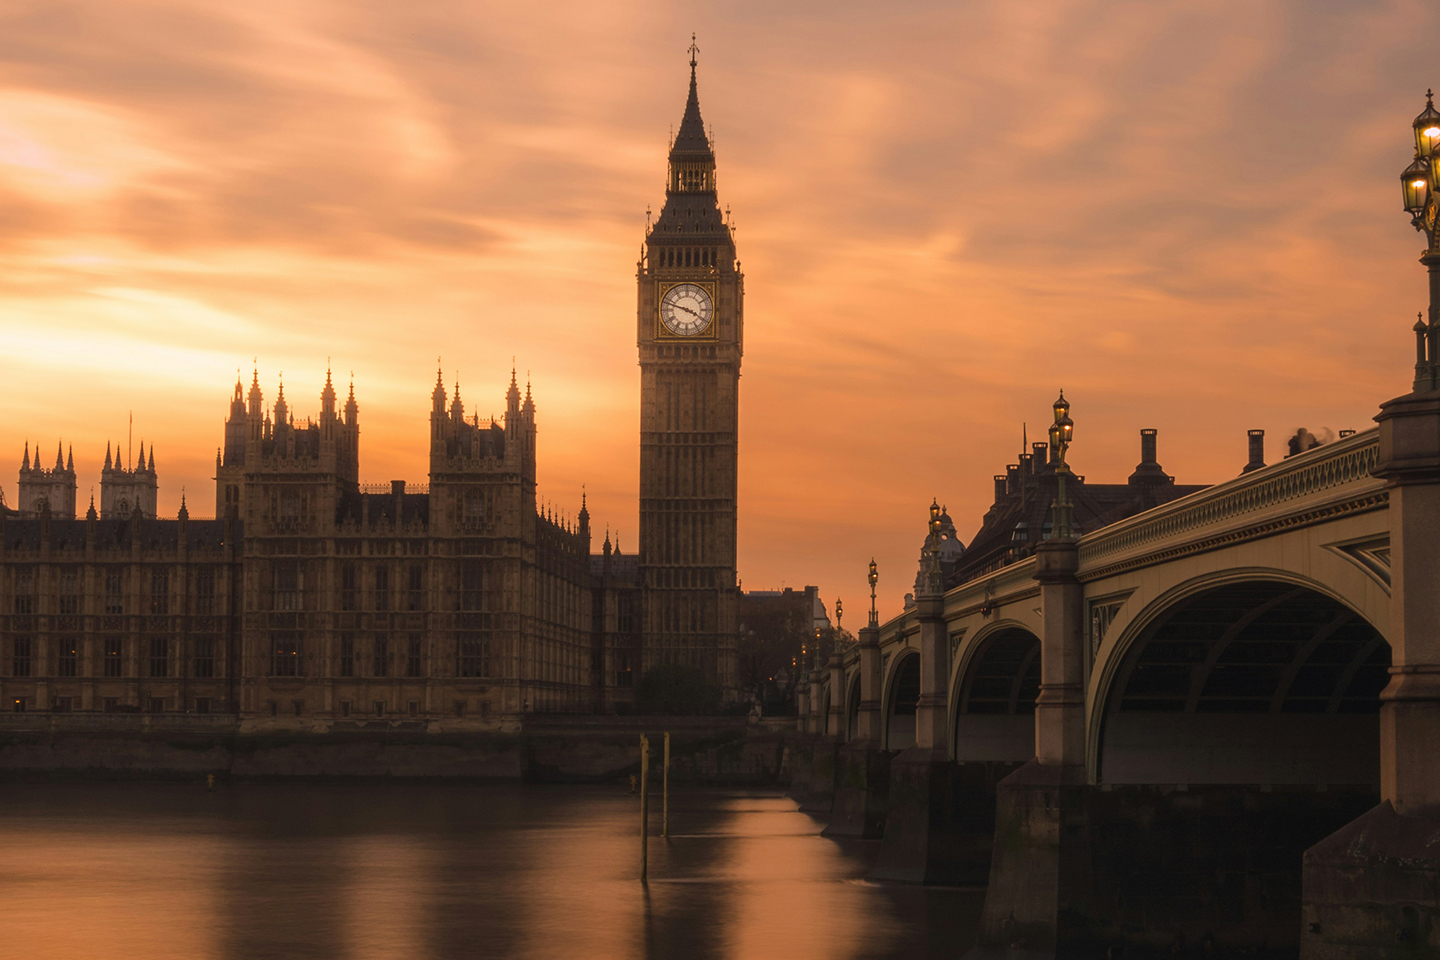 The Houses of Parliament at dusk from across the River Thames. “A missed opportunity”: what the Spring Budget means for private clients—eprivateclient